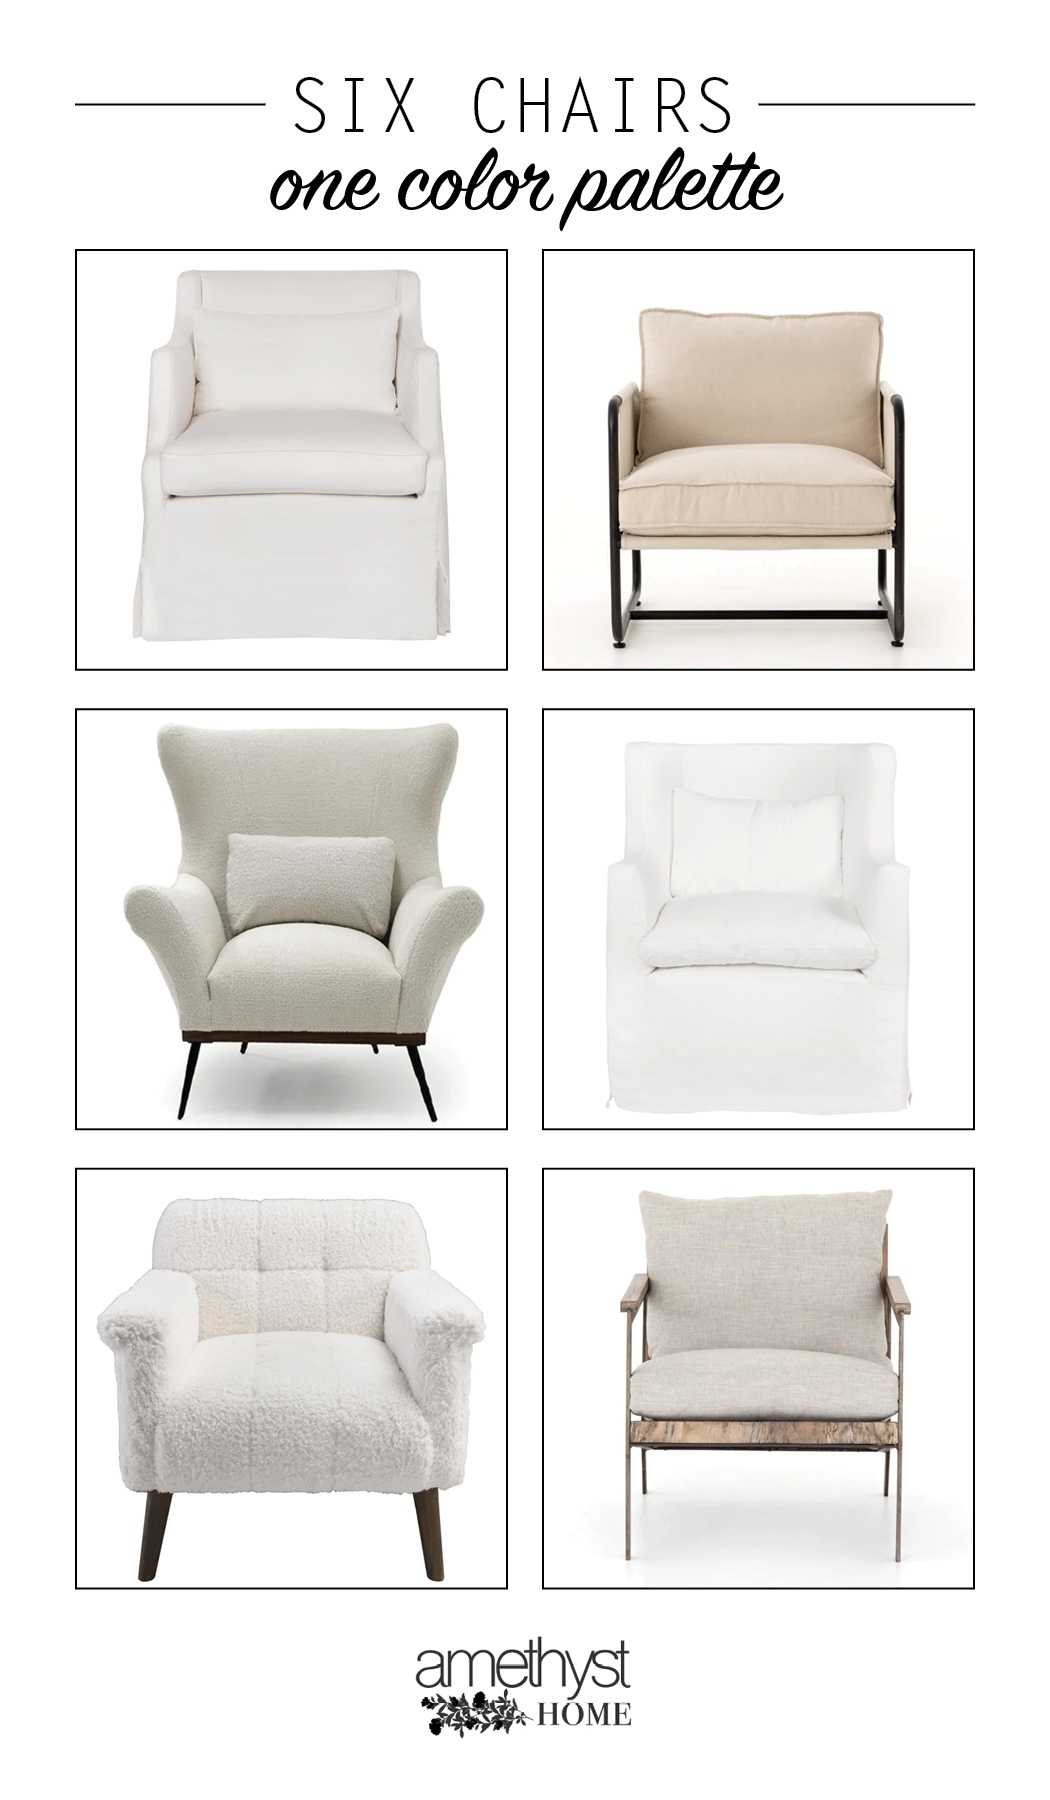 We love helping our wonderful clients design their homes, and often it all comes down to the chairs! There are so many seating options out there, so we try to spotlight the lines, comfort, and style of each chair we select - leaving color/fabric/leather s